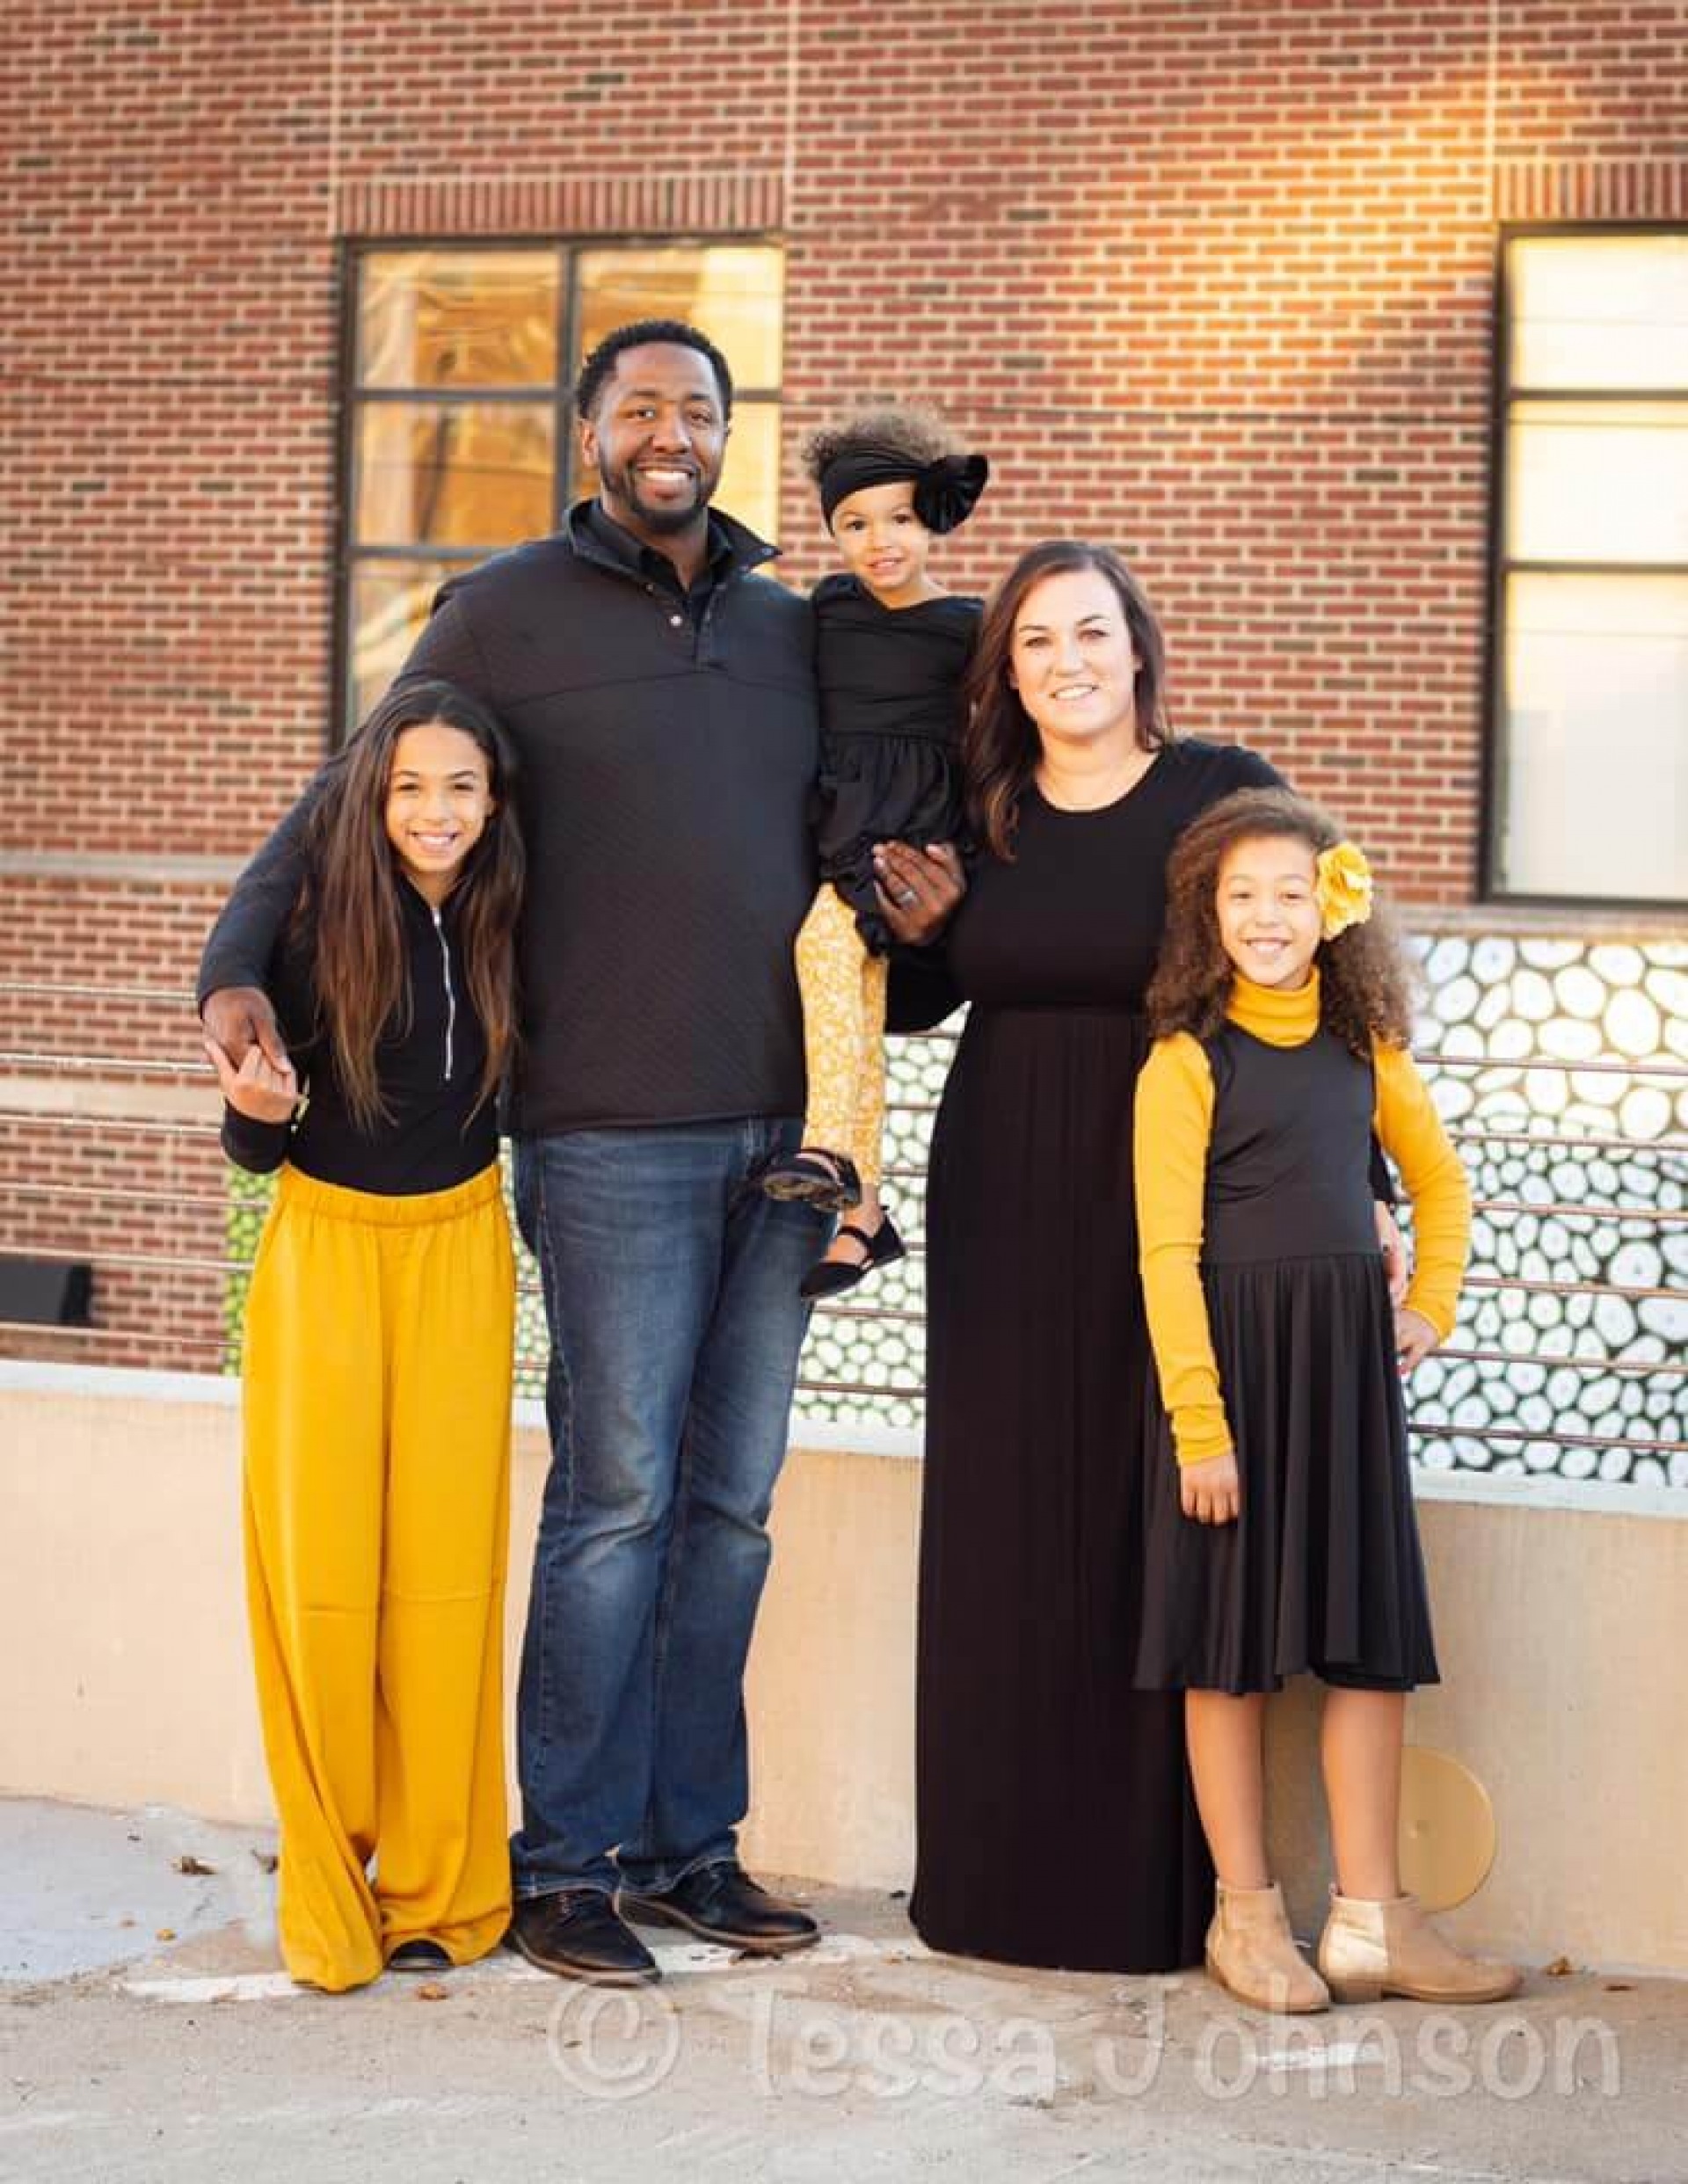 New Football Coach Rich Mayson and his wife Kristin and three daughters posing for a family photo.